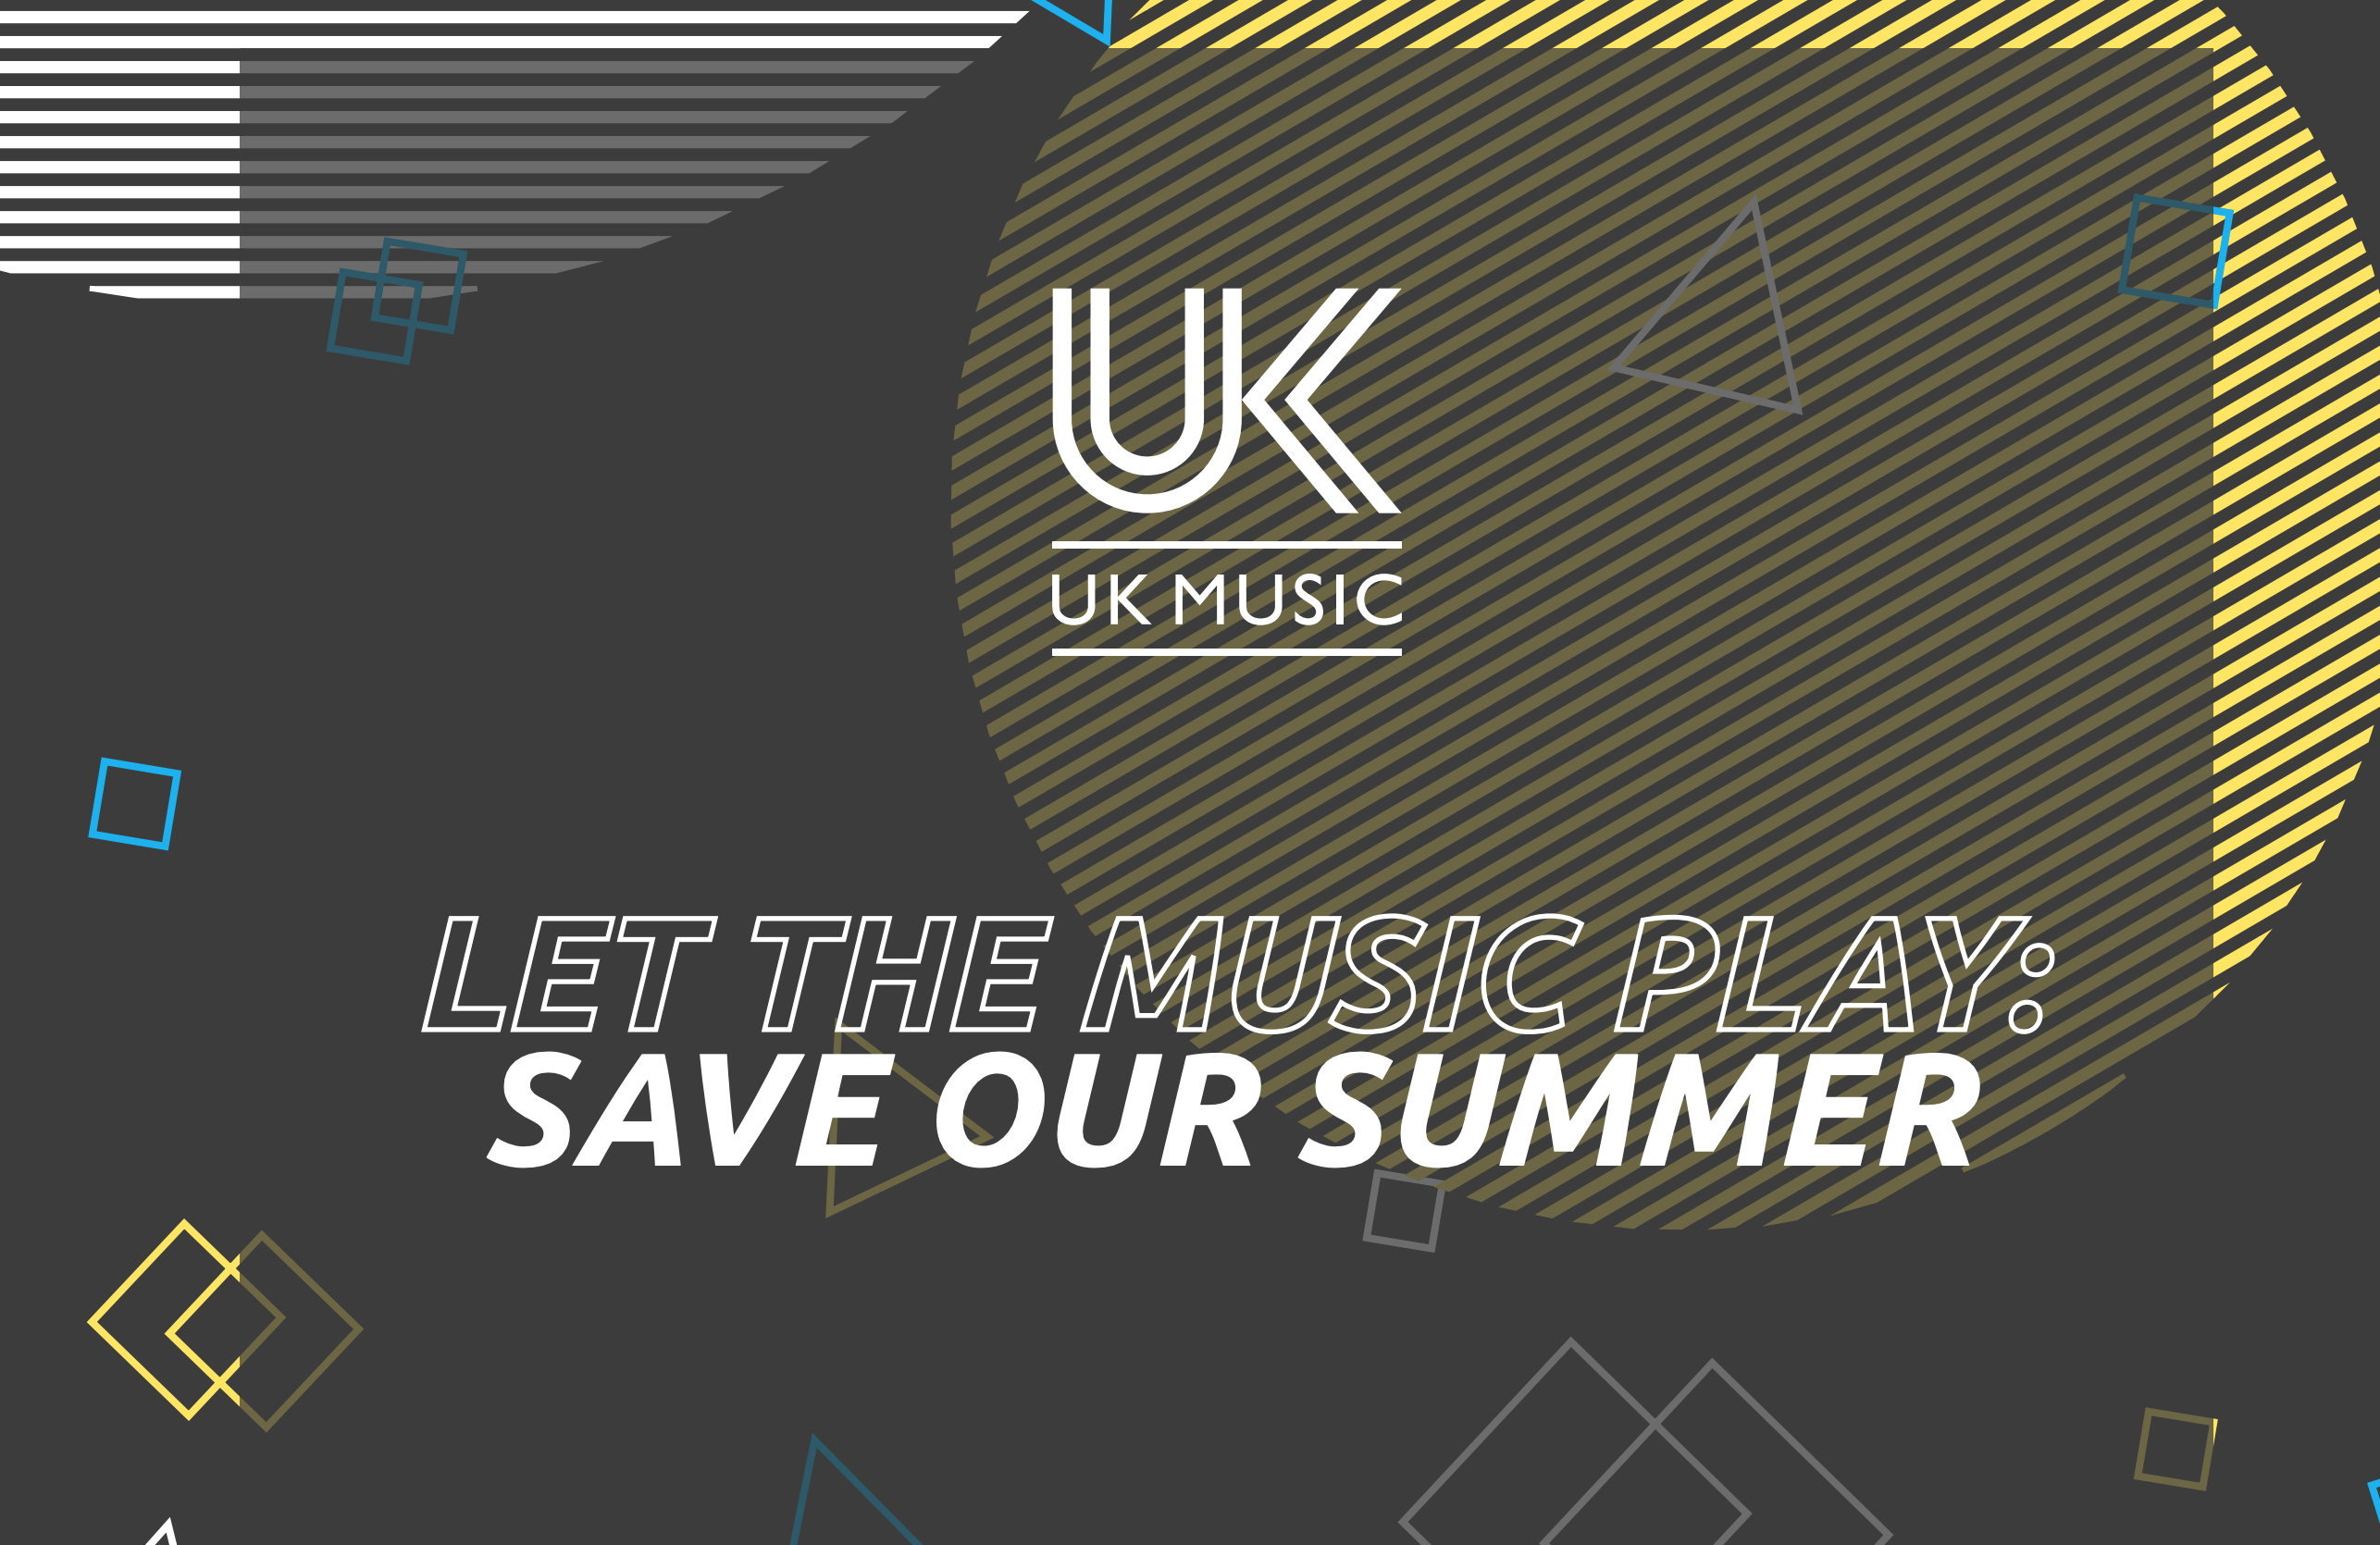 UK Music Releases New Report Outlining Strategy To Restart Live Music Industry When Safe